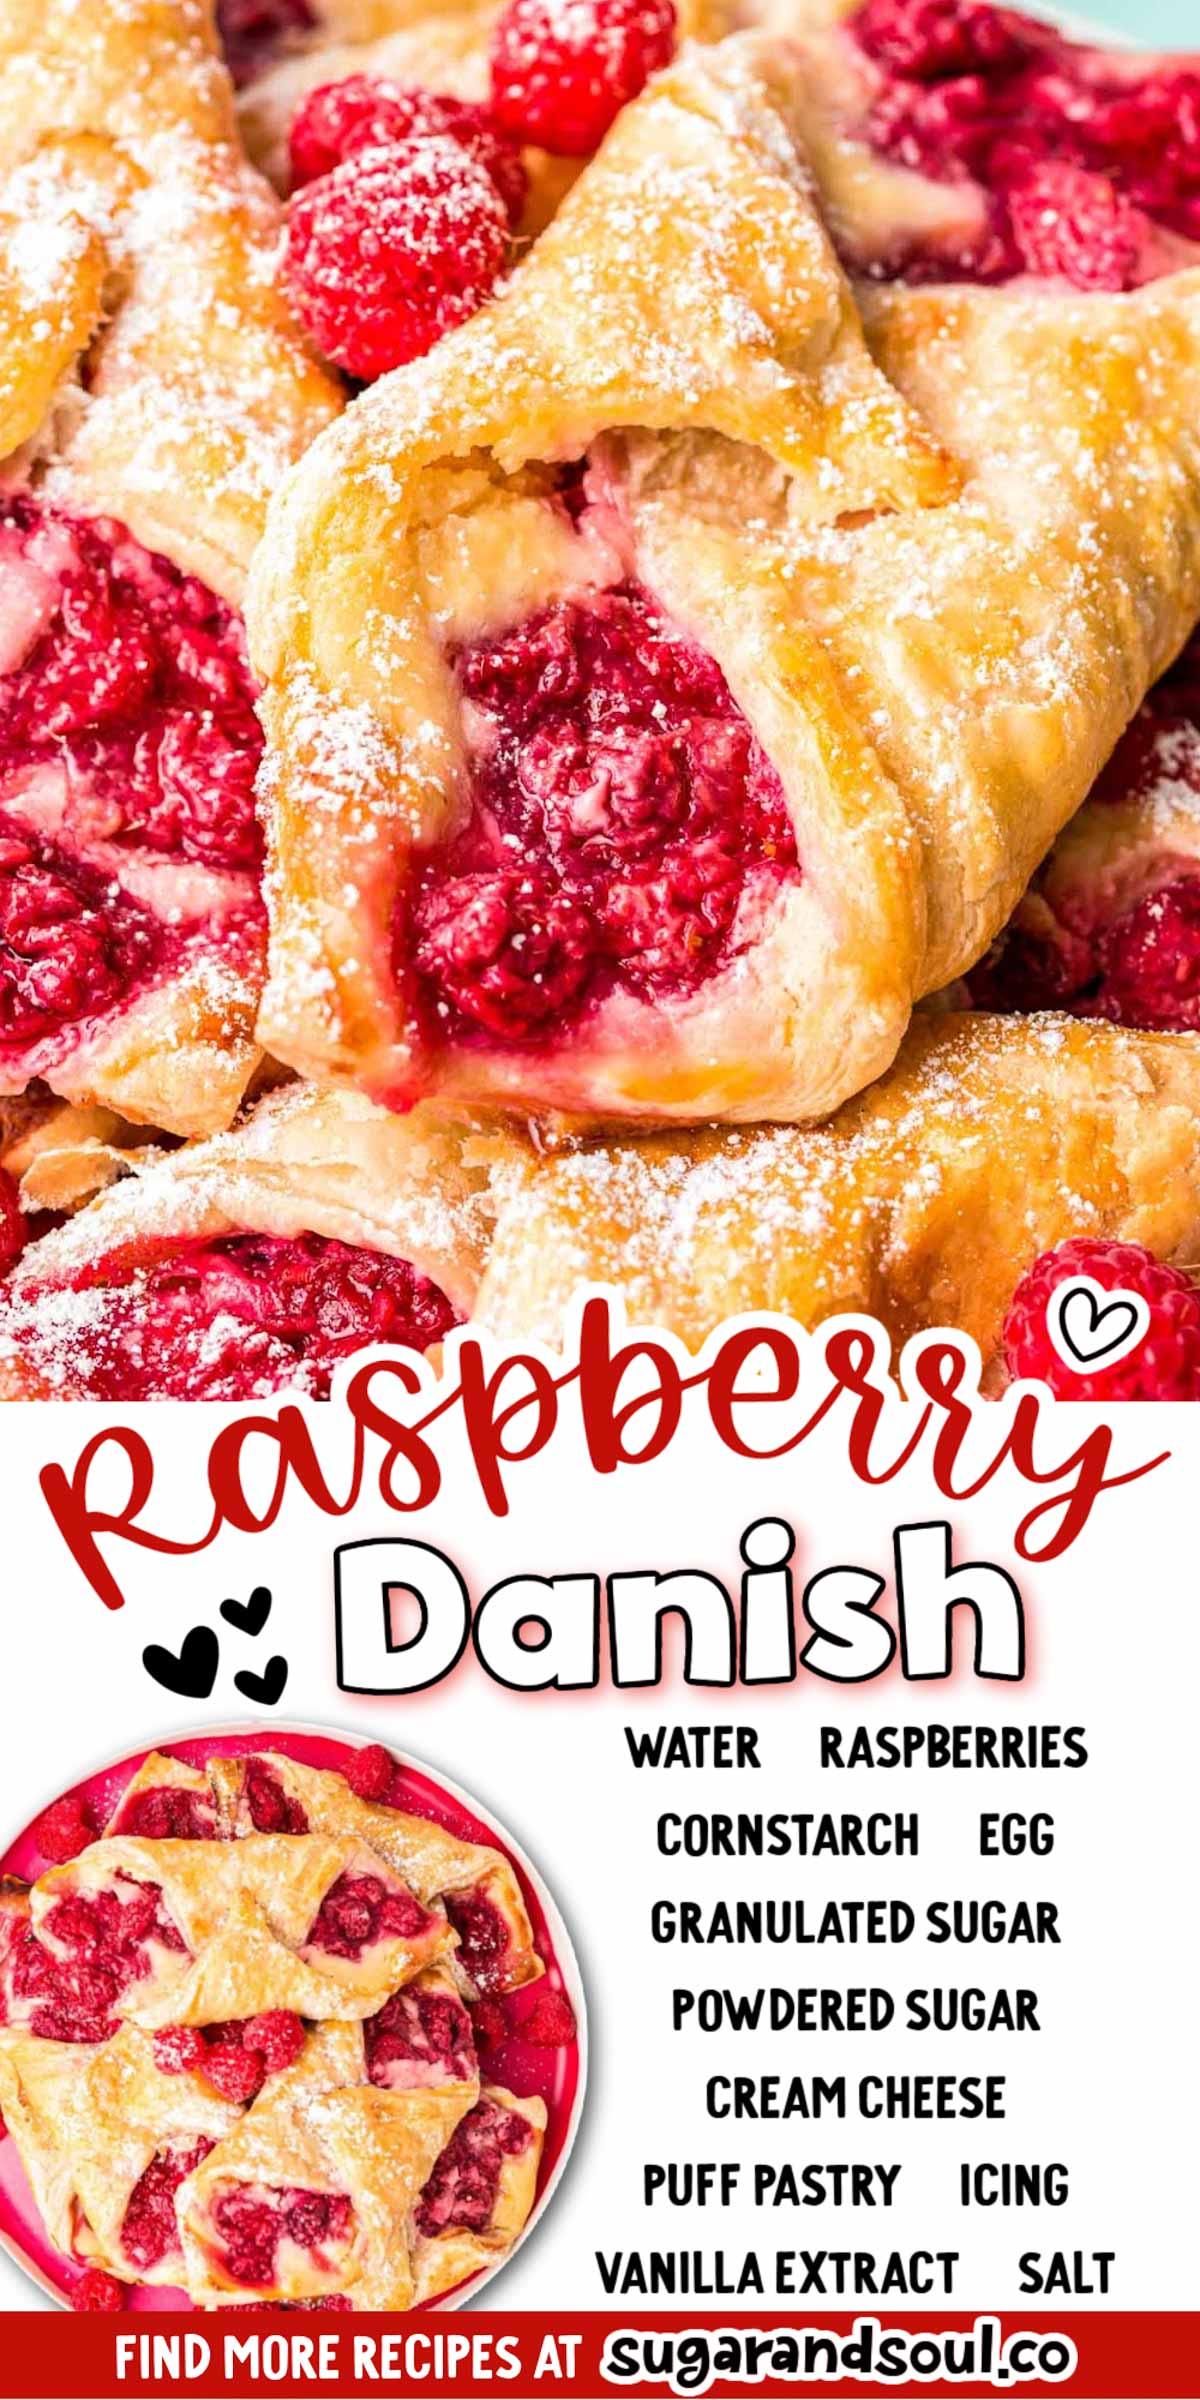 Raspberry Danish is a flaky, golden brown breakfast pastry that's topped with sweet cream cheese filling and macerated fresh raspberries! These sweet treats bake up to perfection in only 20 minutes! via @sugarandsoulco